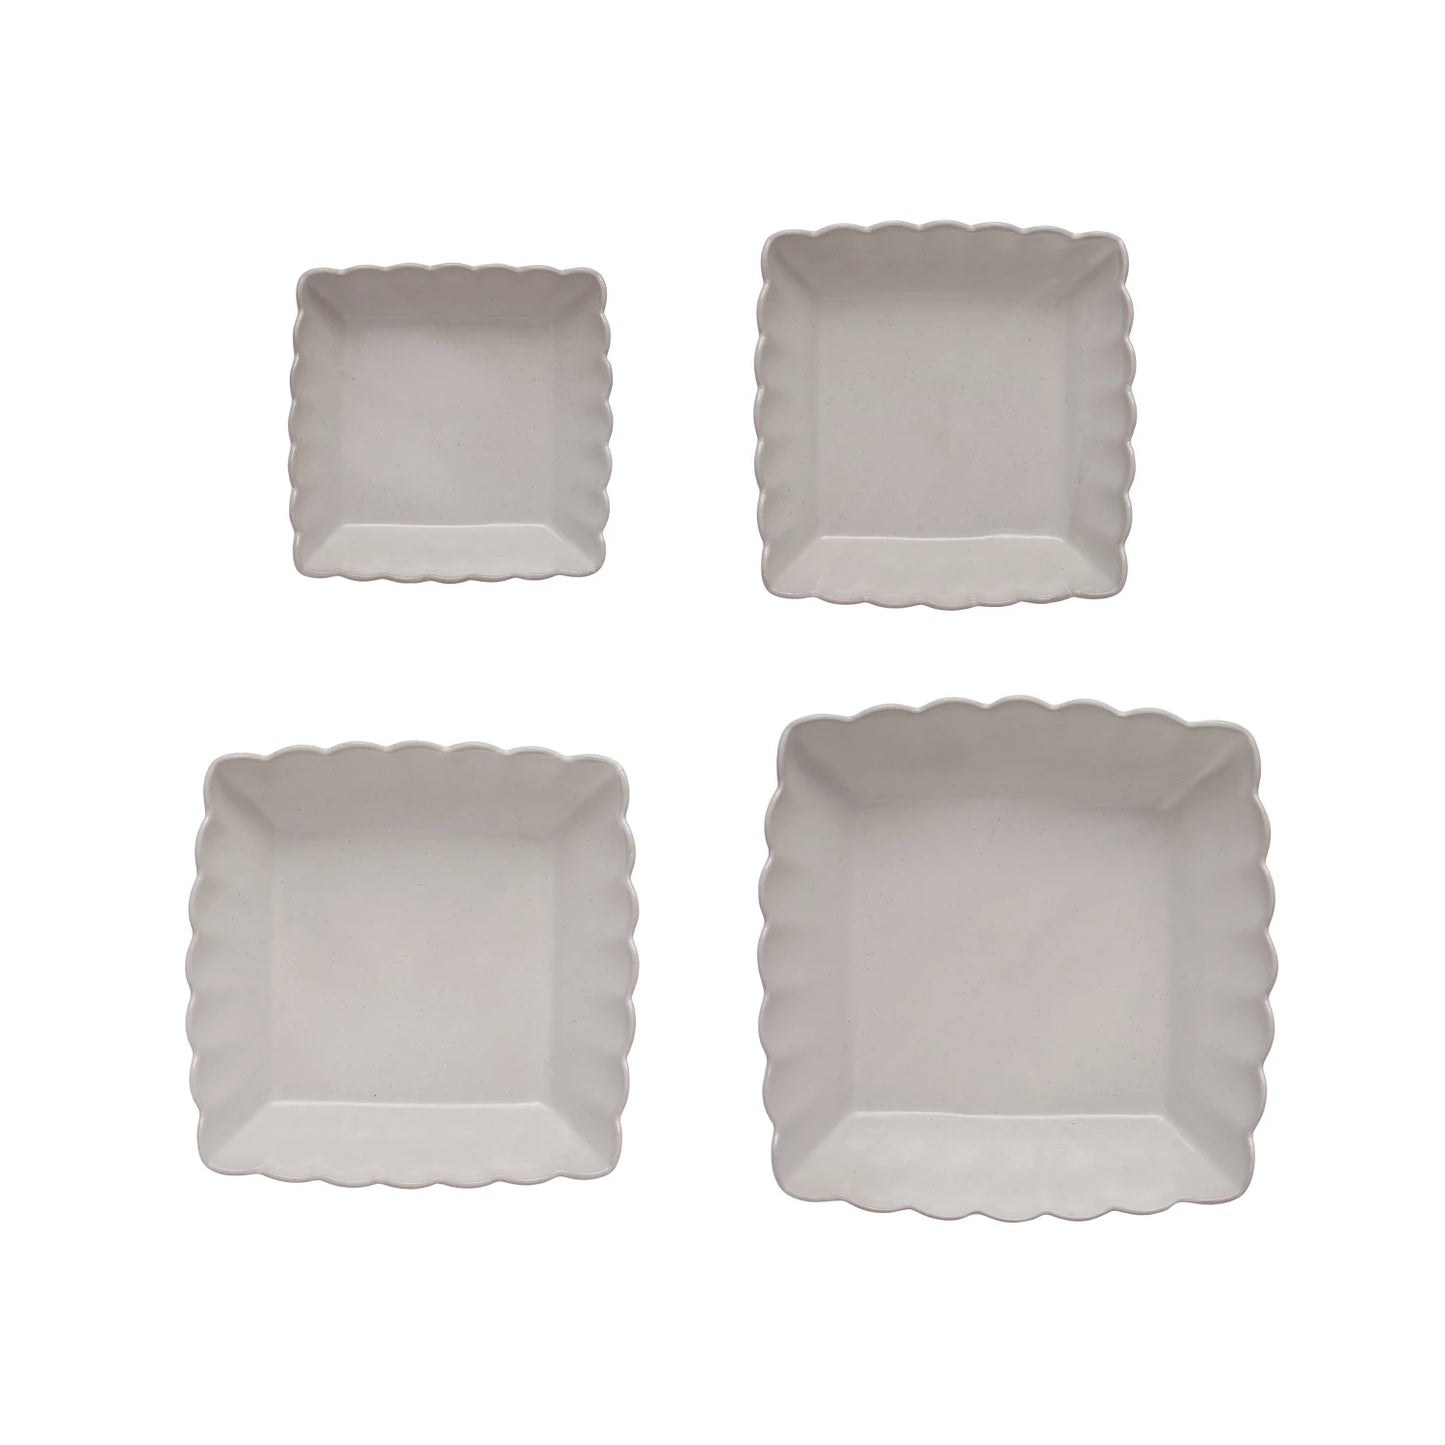 Serving Dishes w/ Scalloped Edge- Set of 4